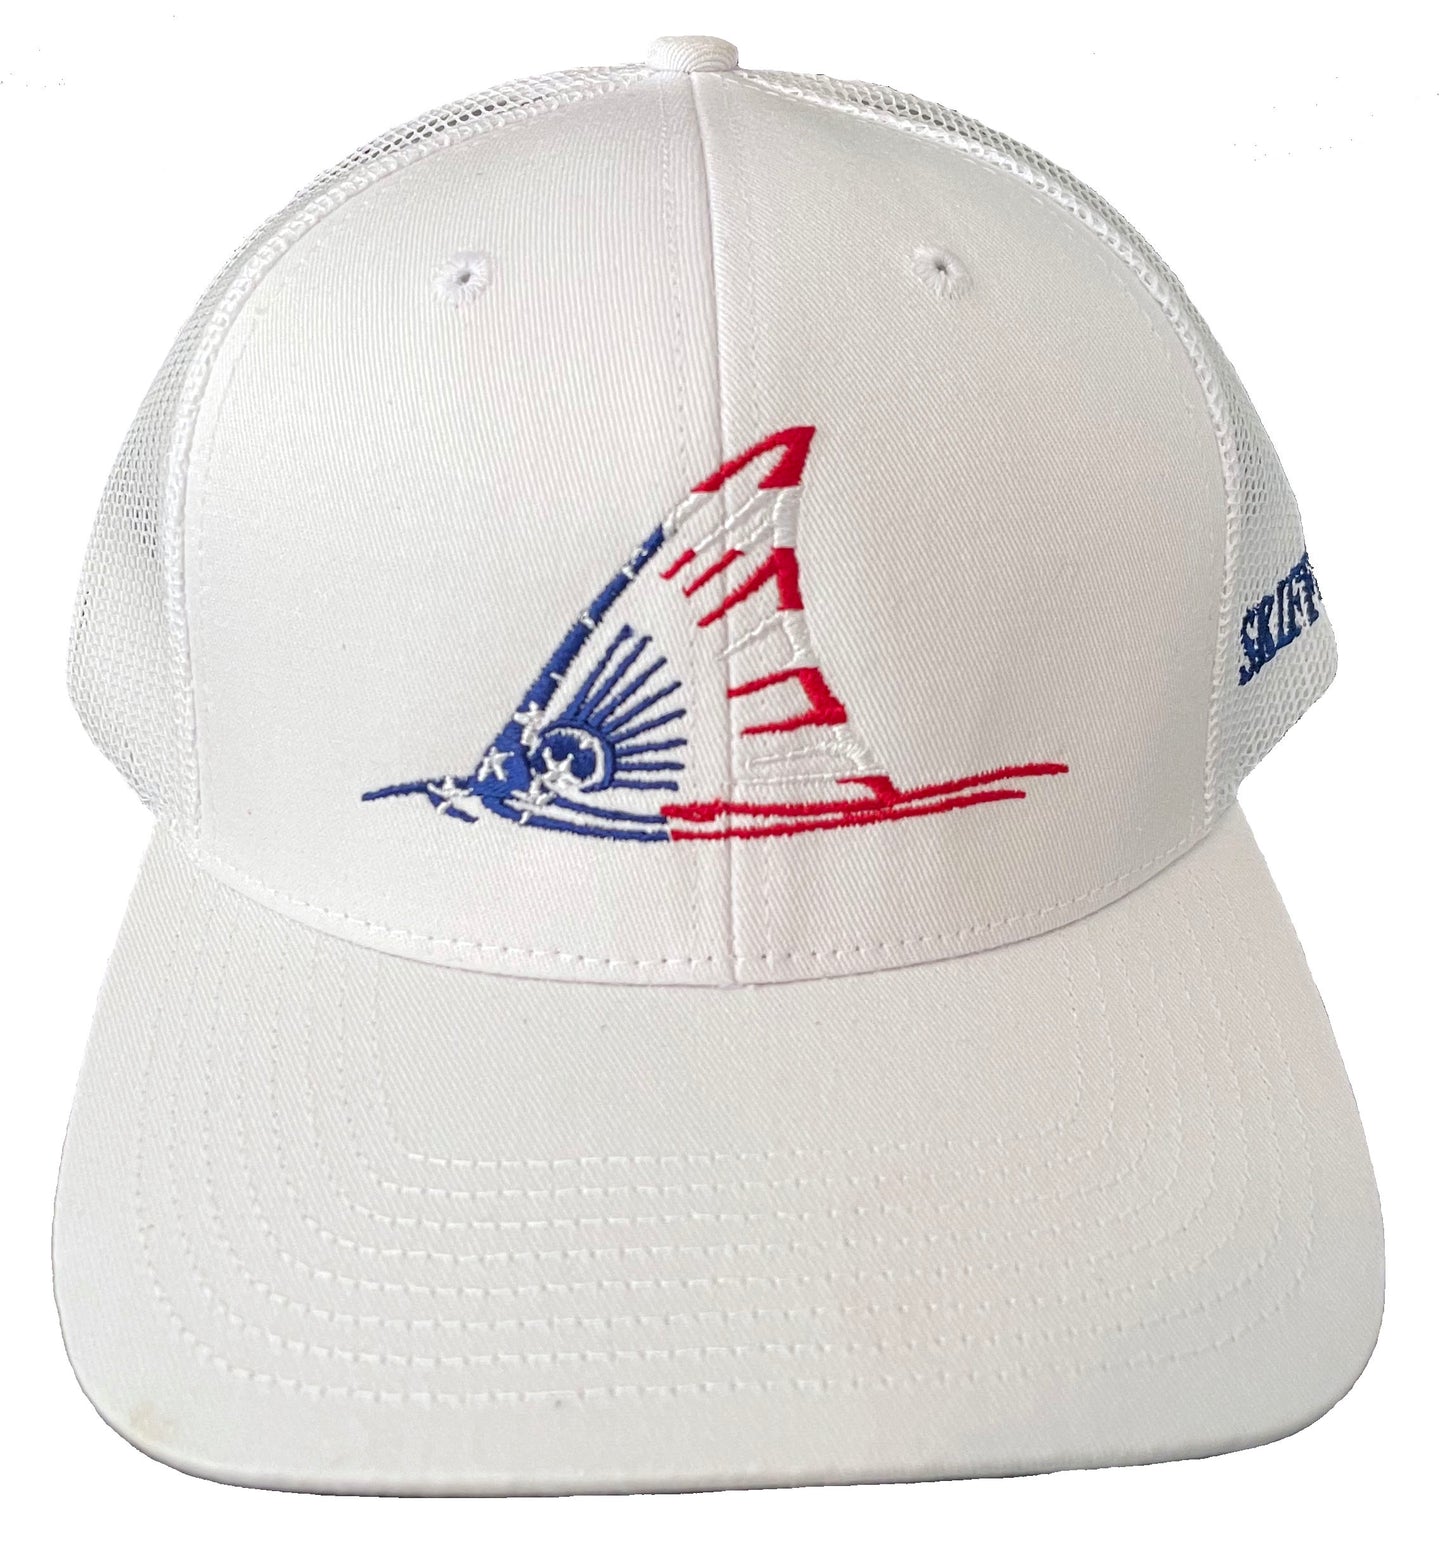 Red, White and Blue Redfish Tail on White and White Meshback Trucker Hats by Skiff Life - Skiff Life